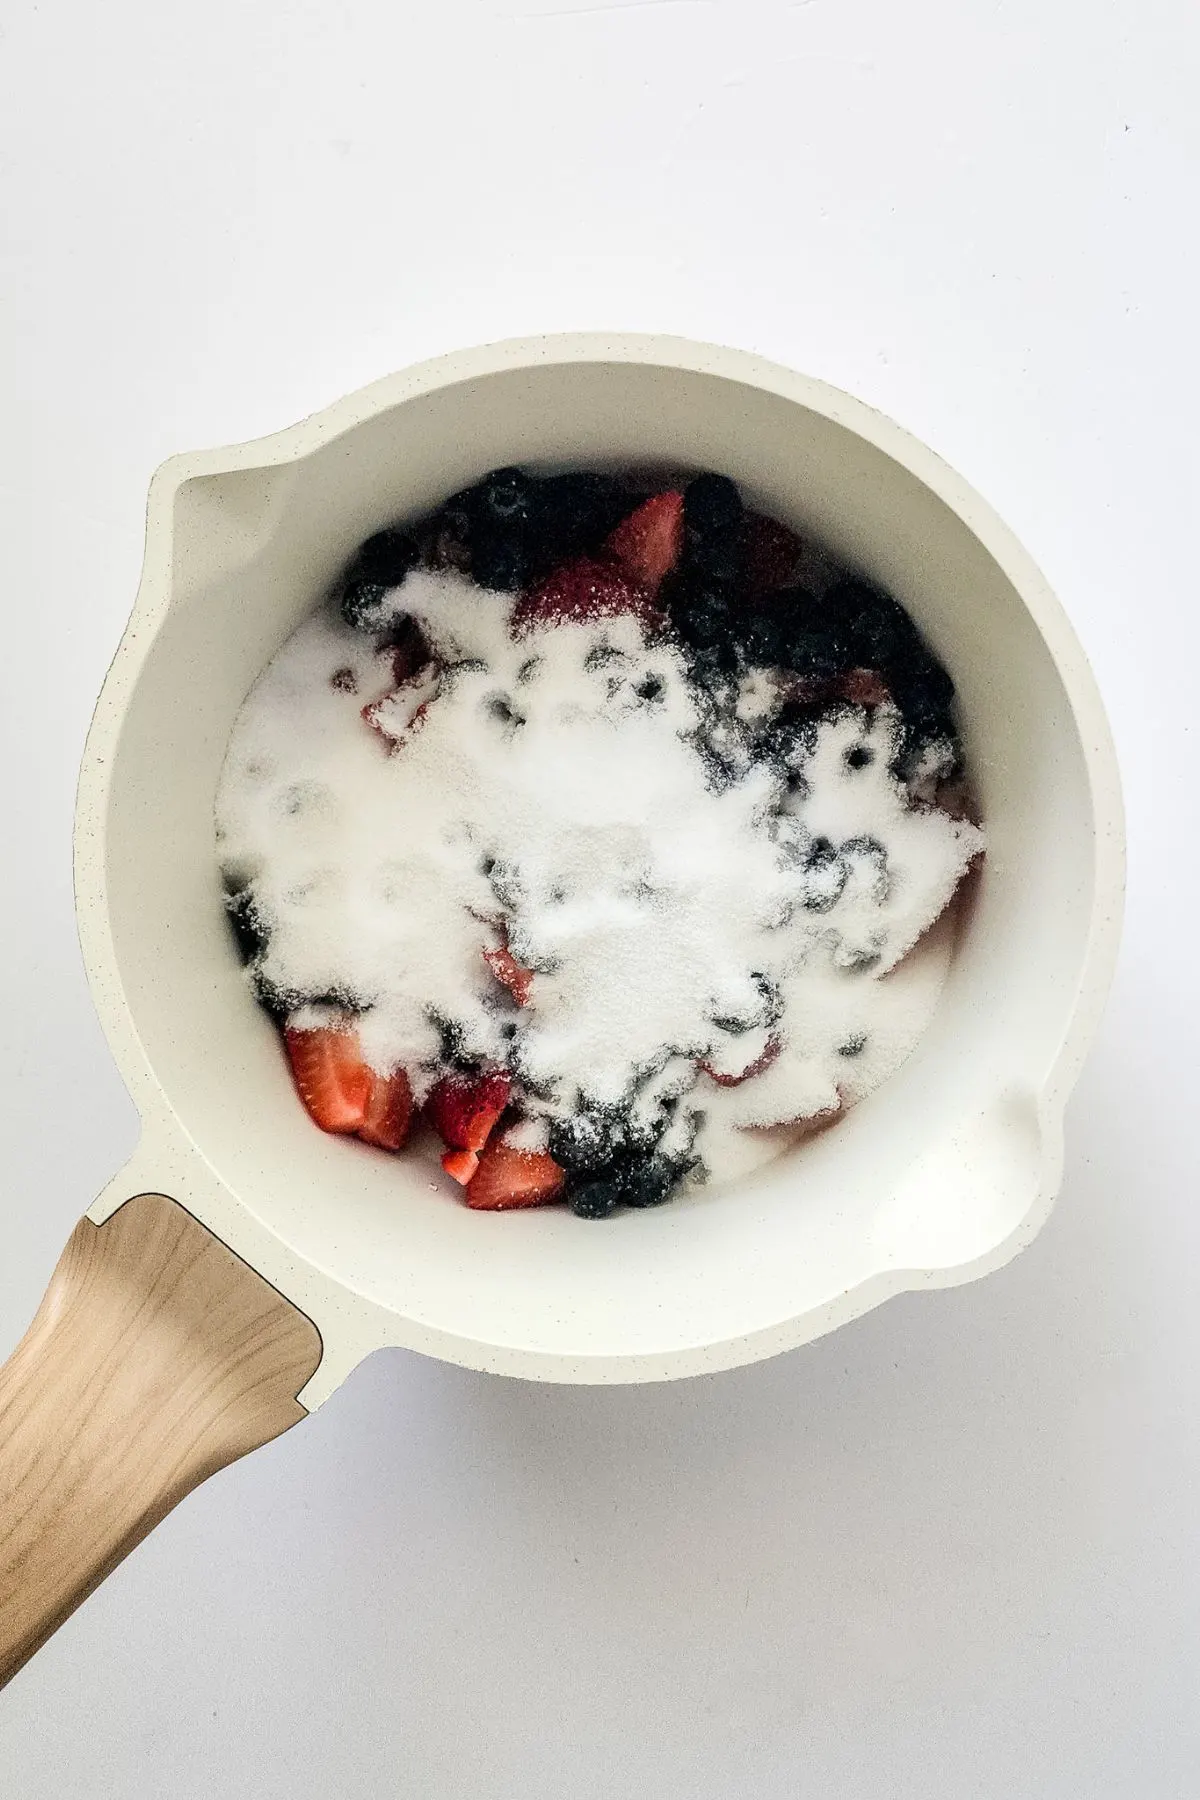 A skillet of berries and sugar.